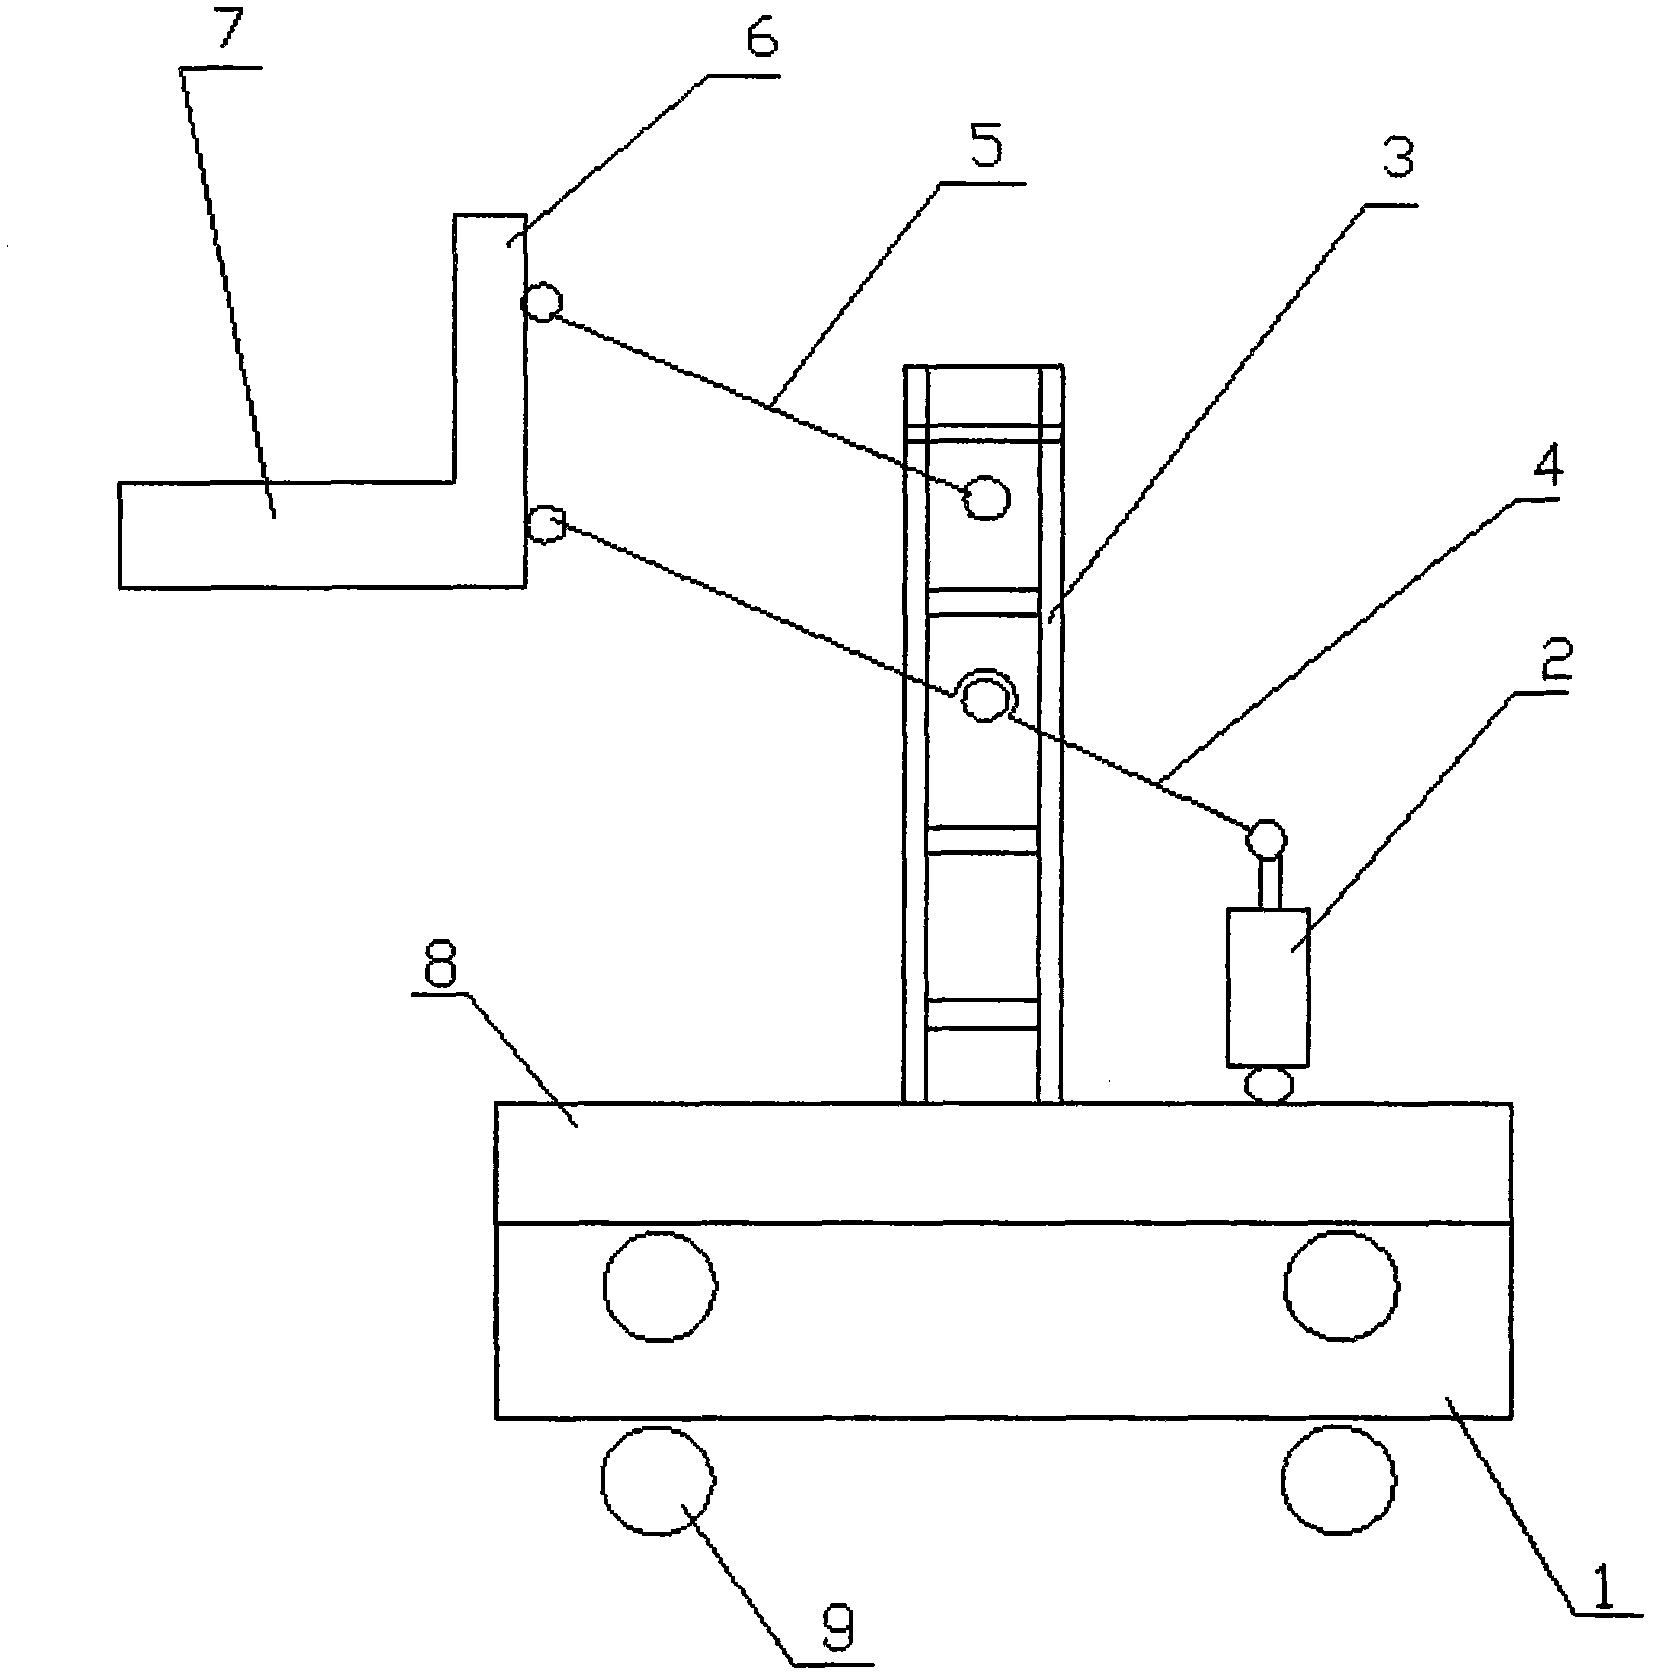 Novel automatic transporting device